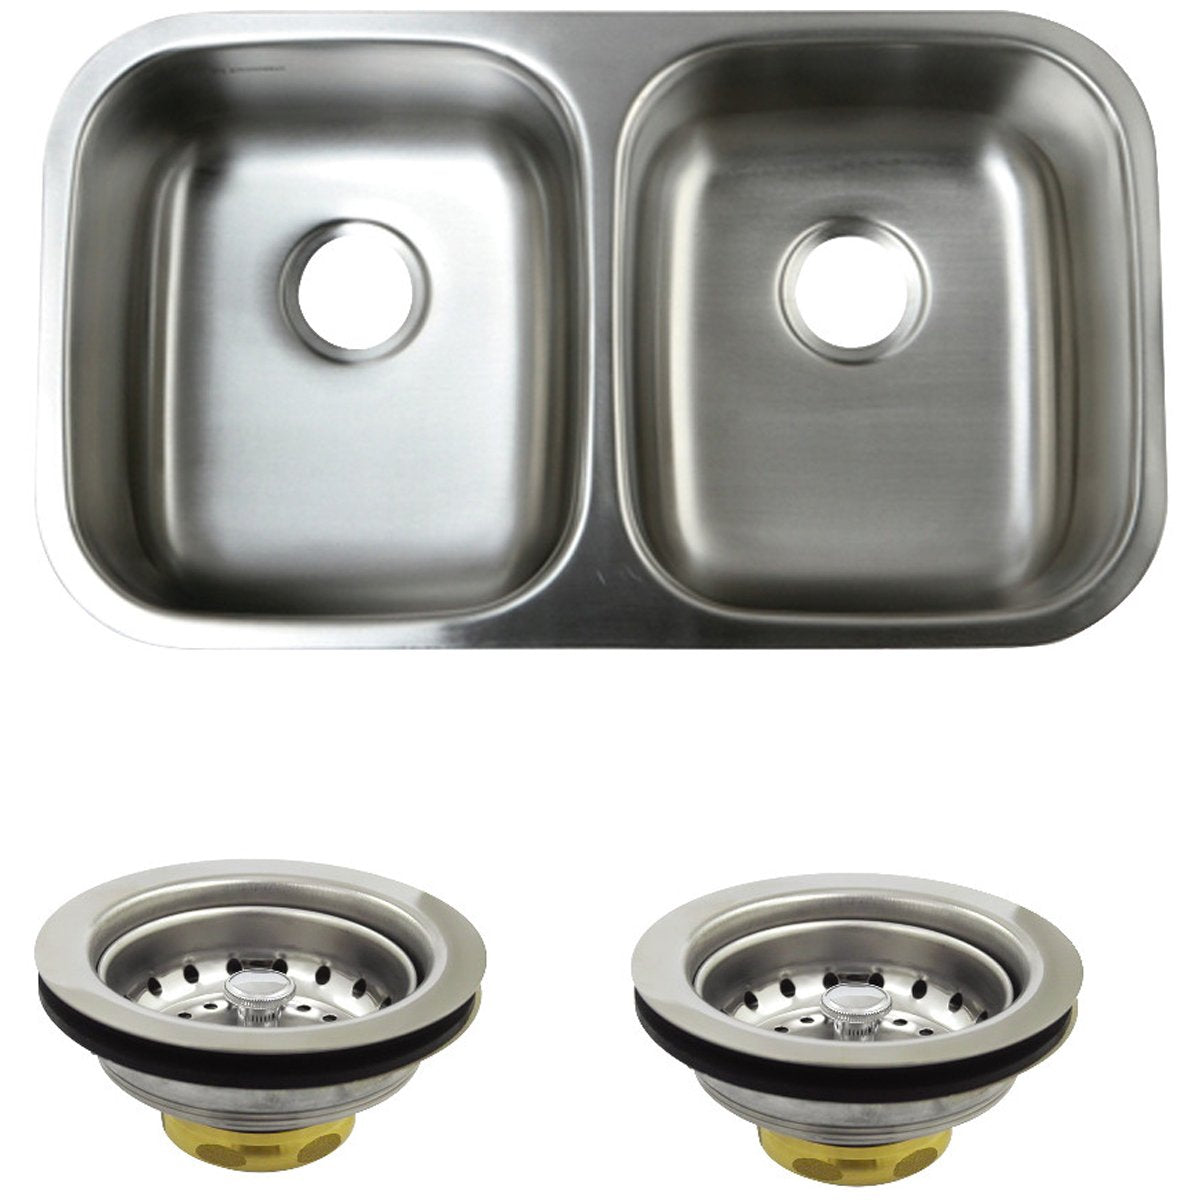 Kingston Brass 31.75" x 18.38" x 7.25" Undermount Stainless Steel Double Bowl Kitchen Sink Combo with Strainers